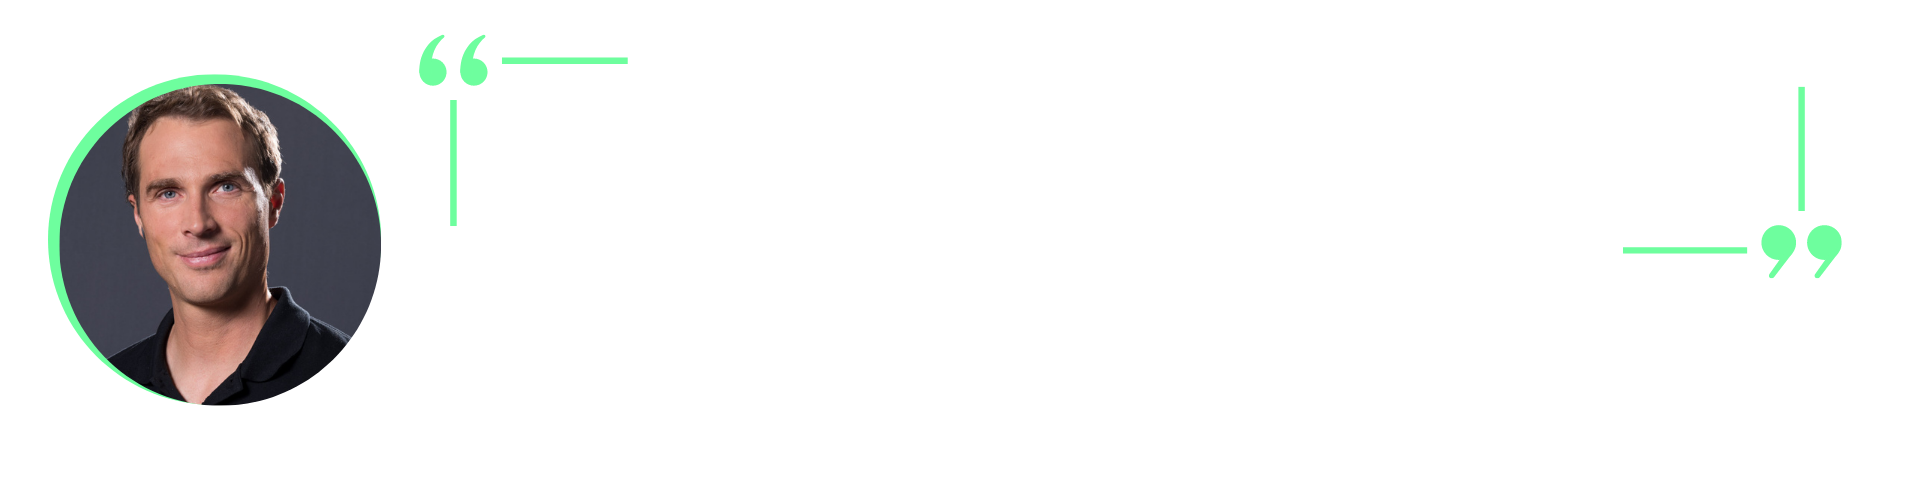 Doctor Vincent Costalat's quotation: "The size of the aneurysm make it a little bit more challenging than five to six millimeter aneurysm"